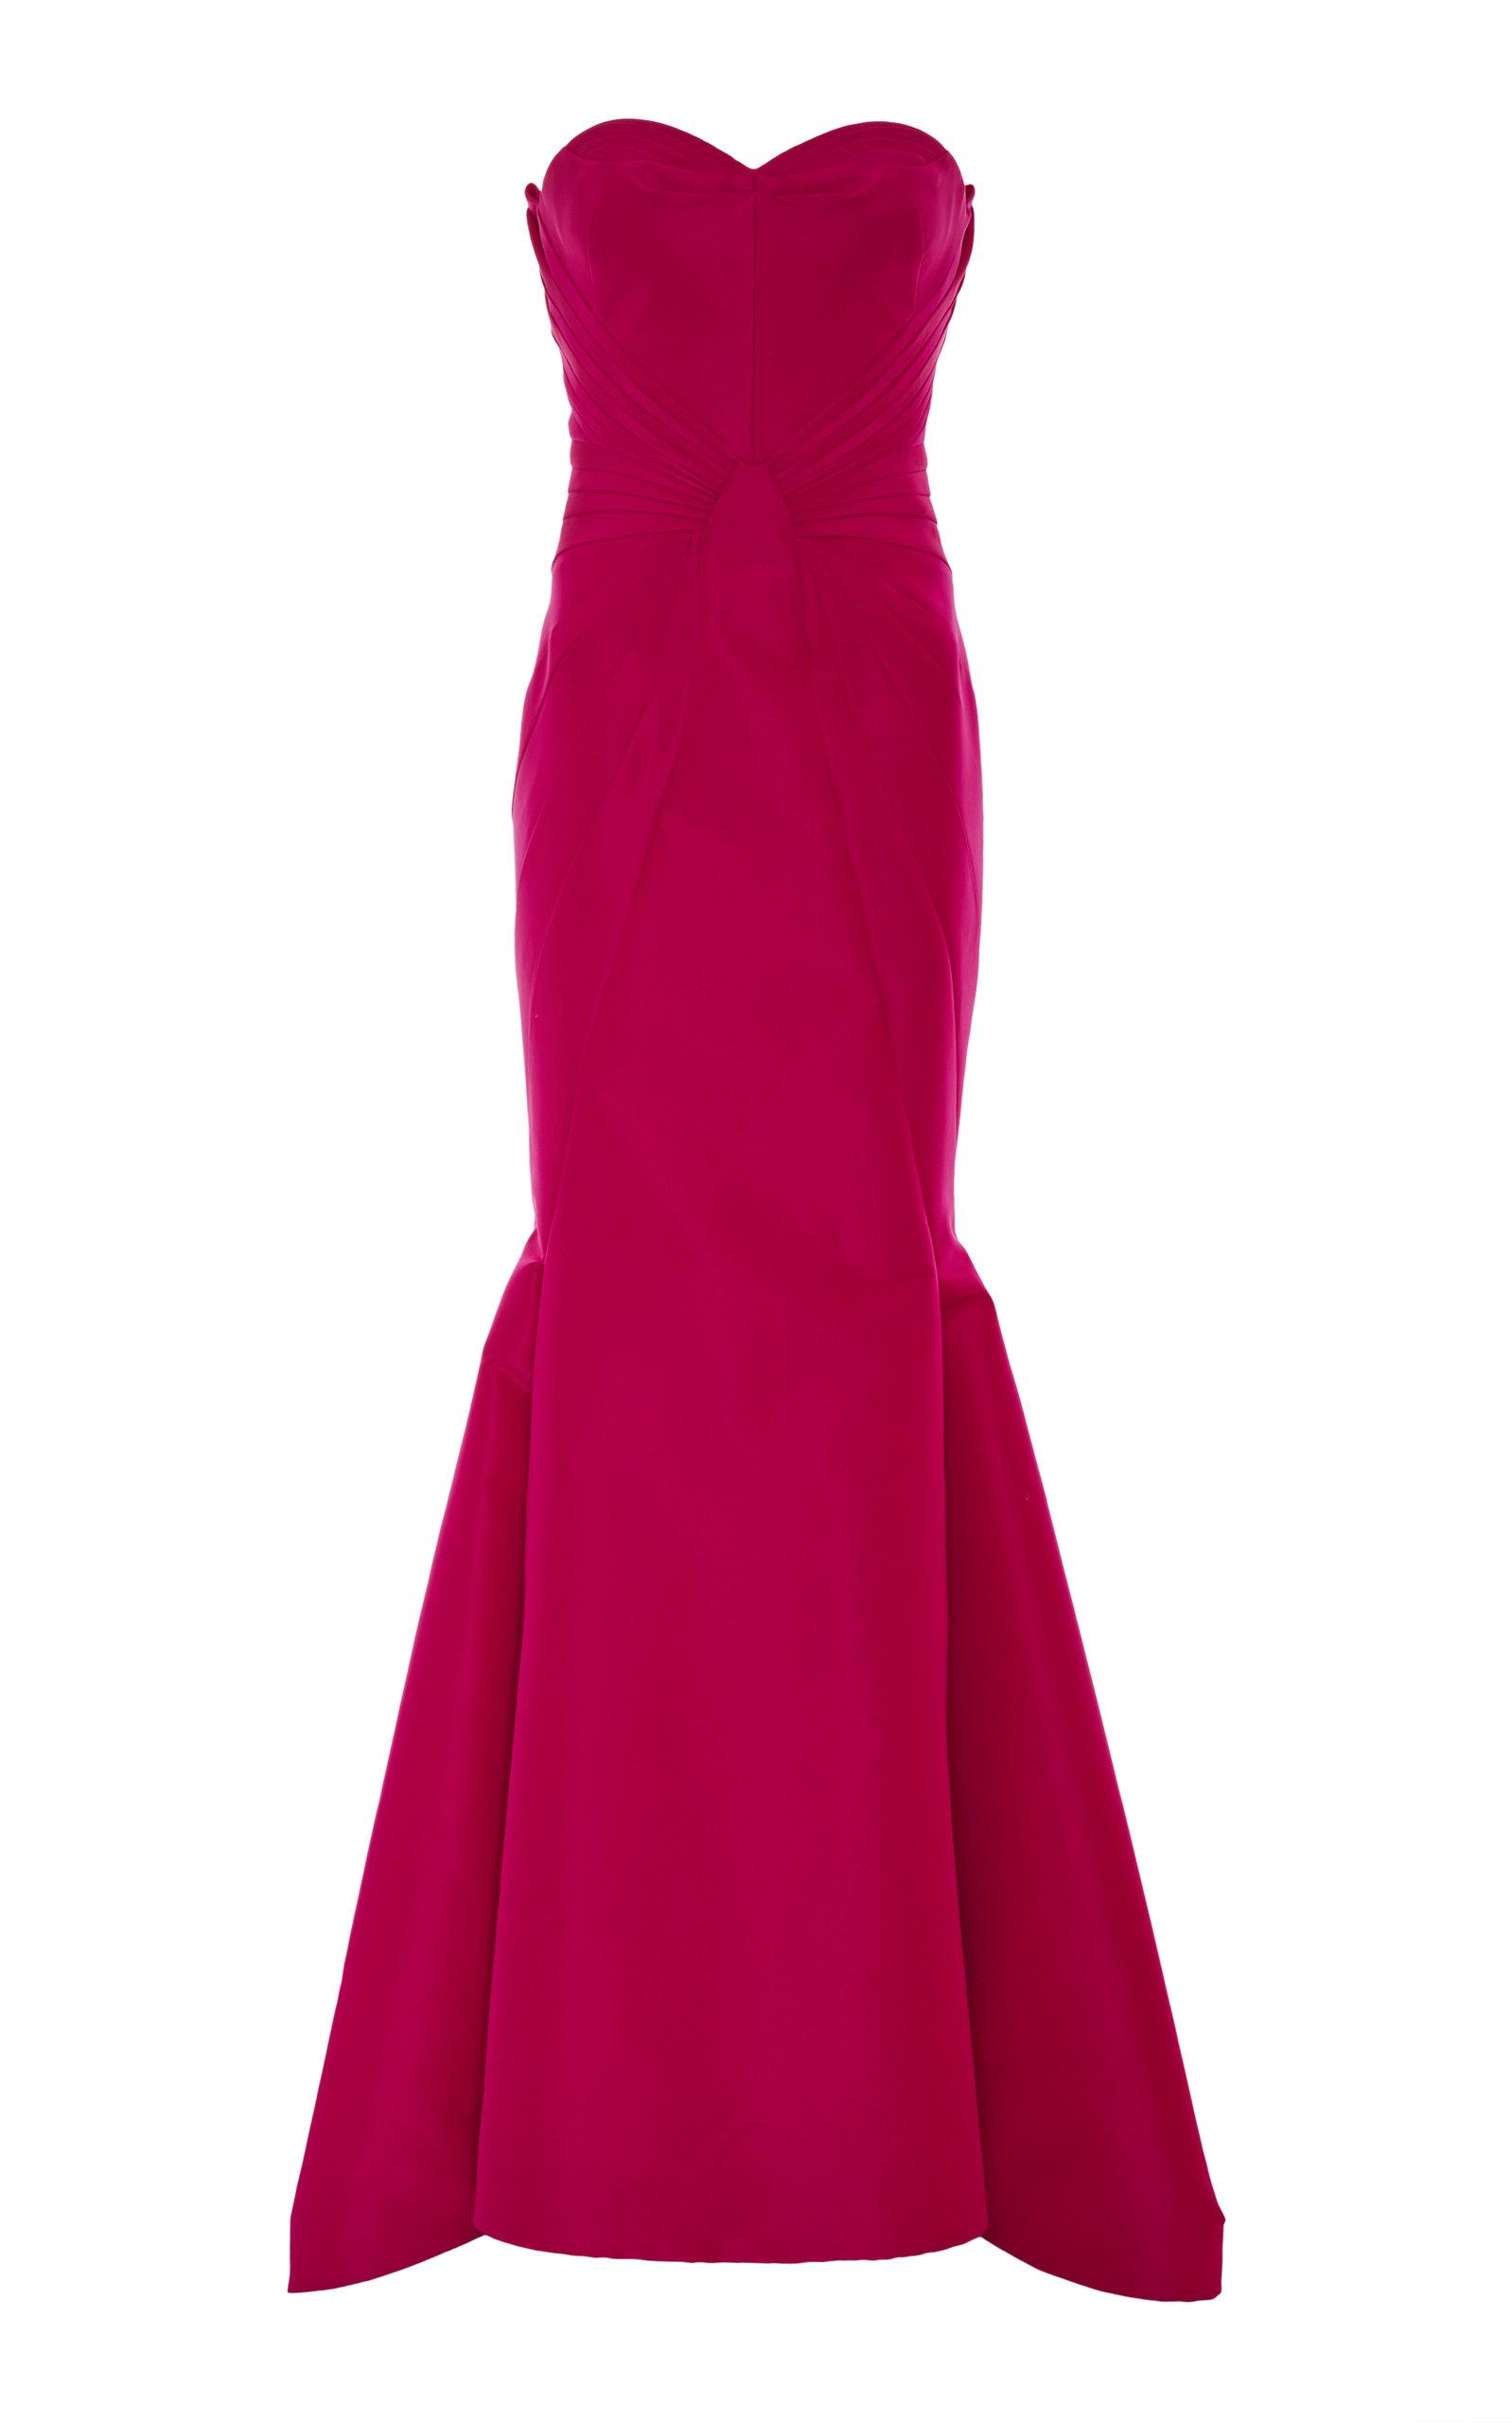 Zac Posen Sweetheart Neck Strapless Gown In Cardinal Red | ModeSens